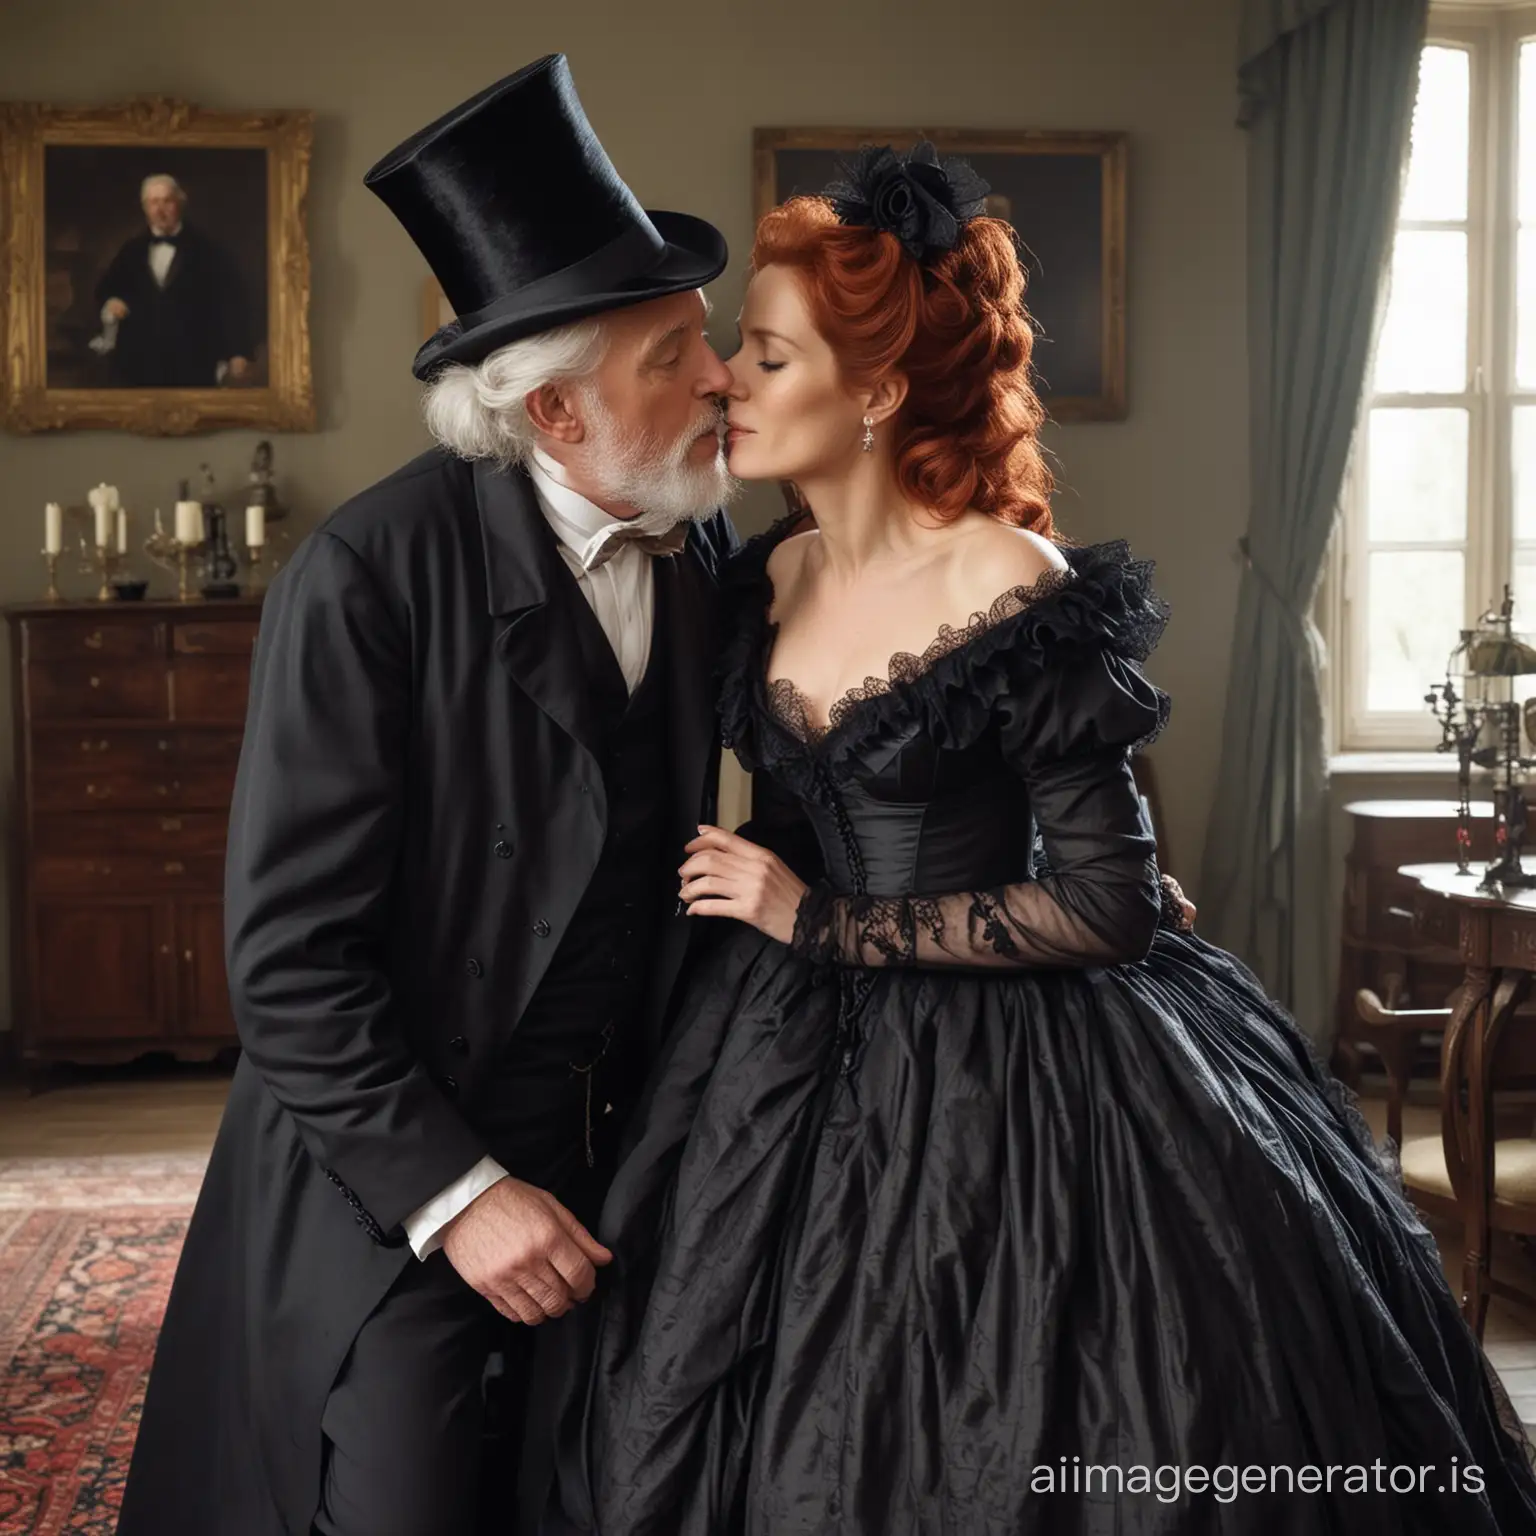 Victorian-Bride-RedHaired-Gillian-Anderson-Embraces-Her-Elderly-Groom-in-Romantic-Kiss